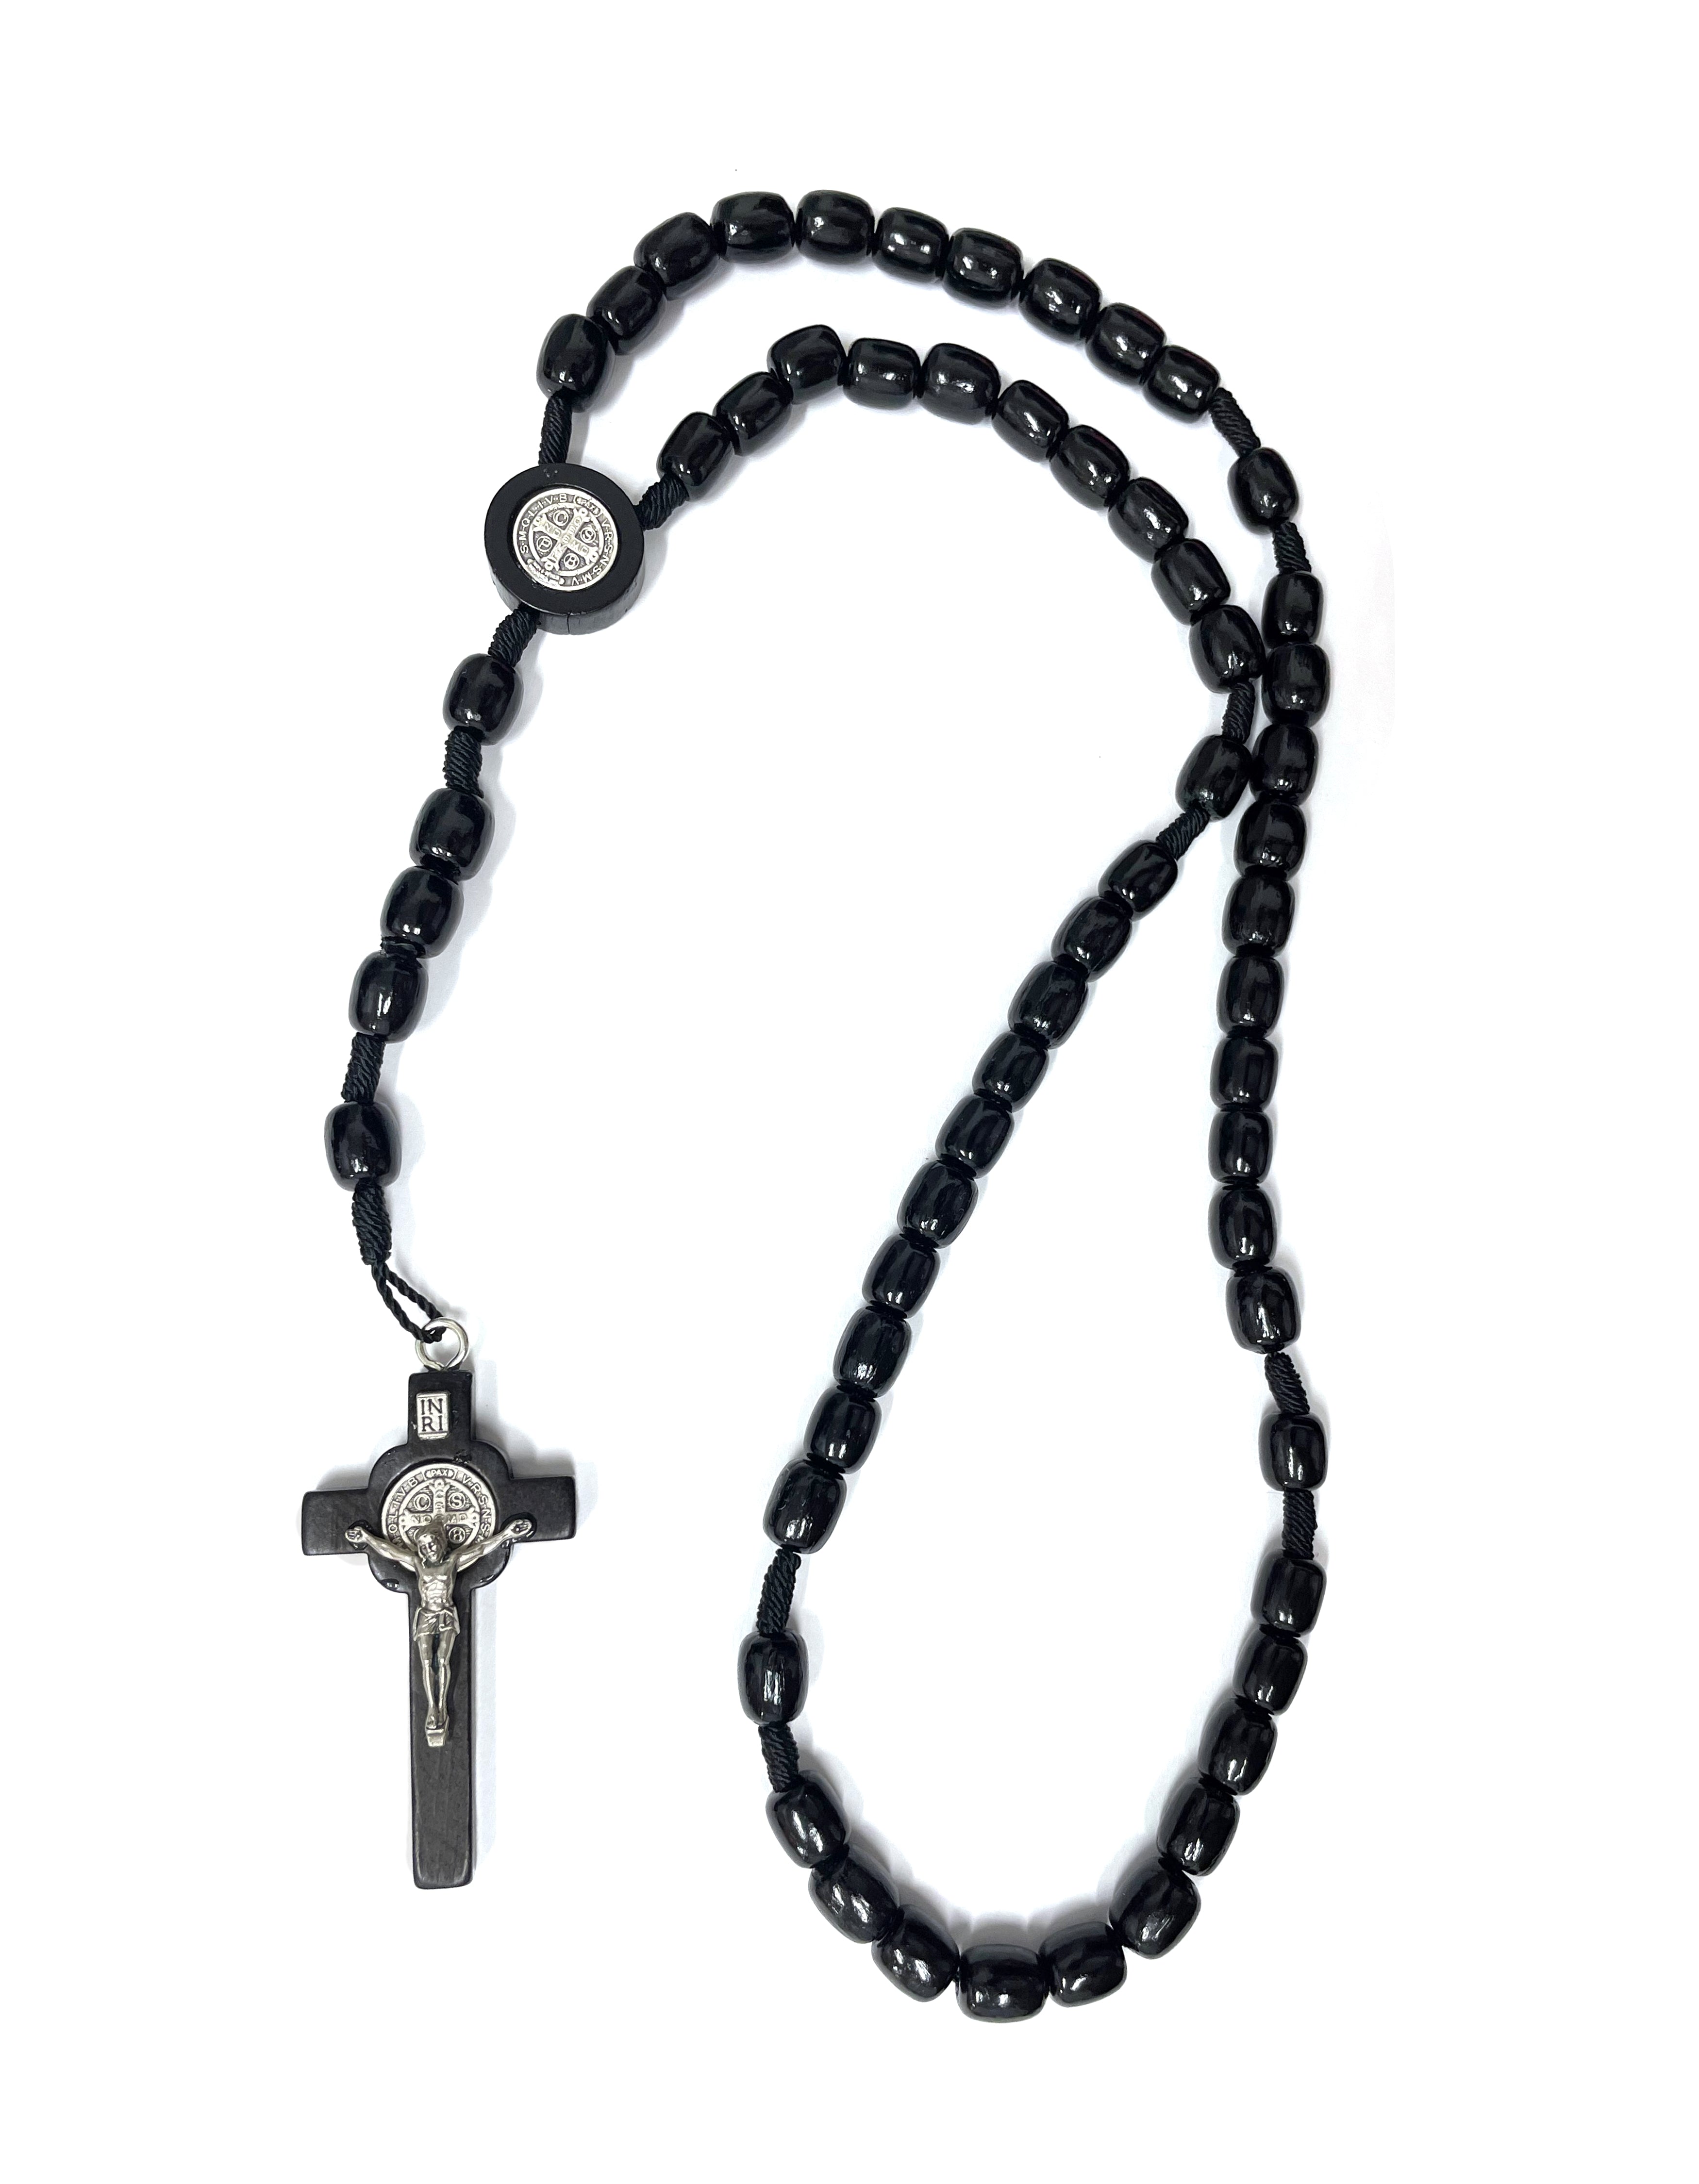 Saint Benedict wooden beads and cord rosary made Italy